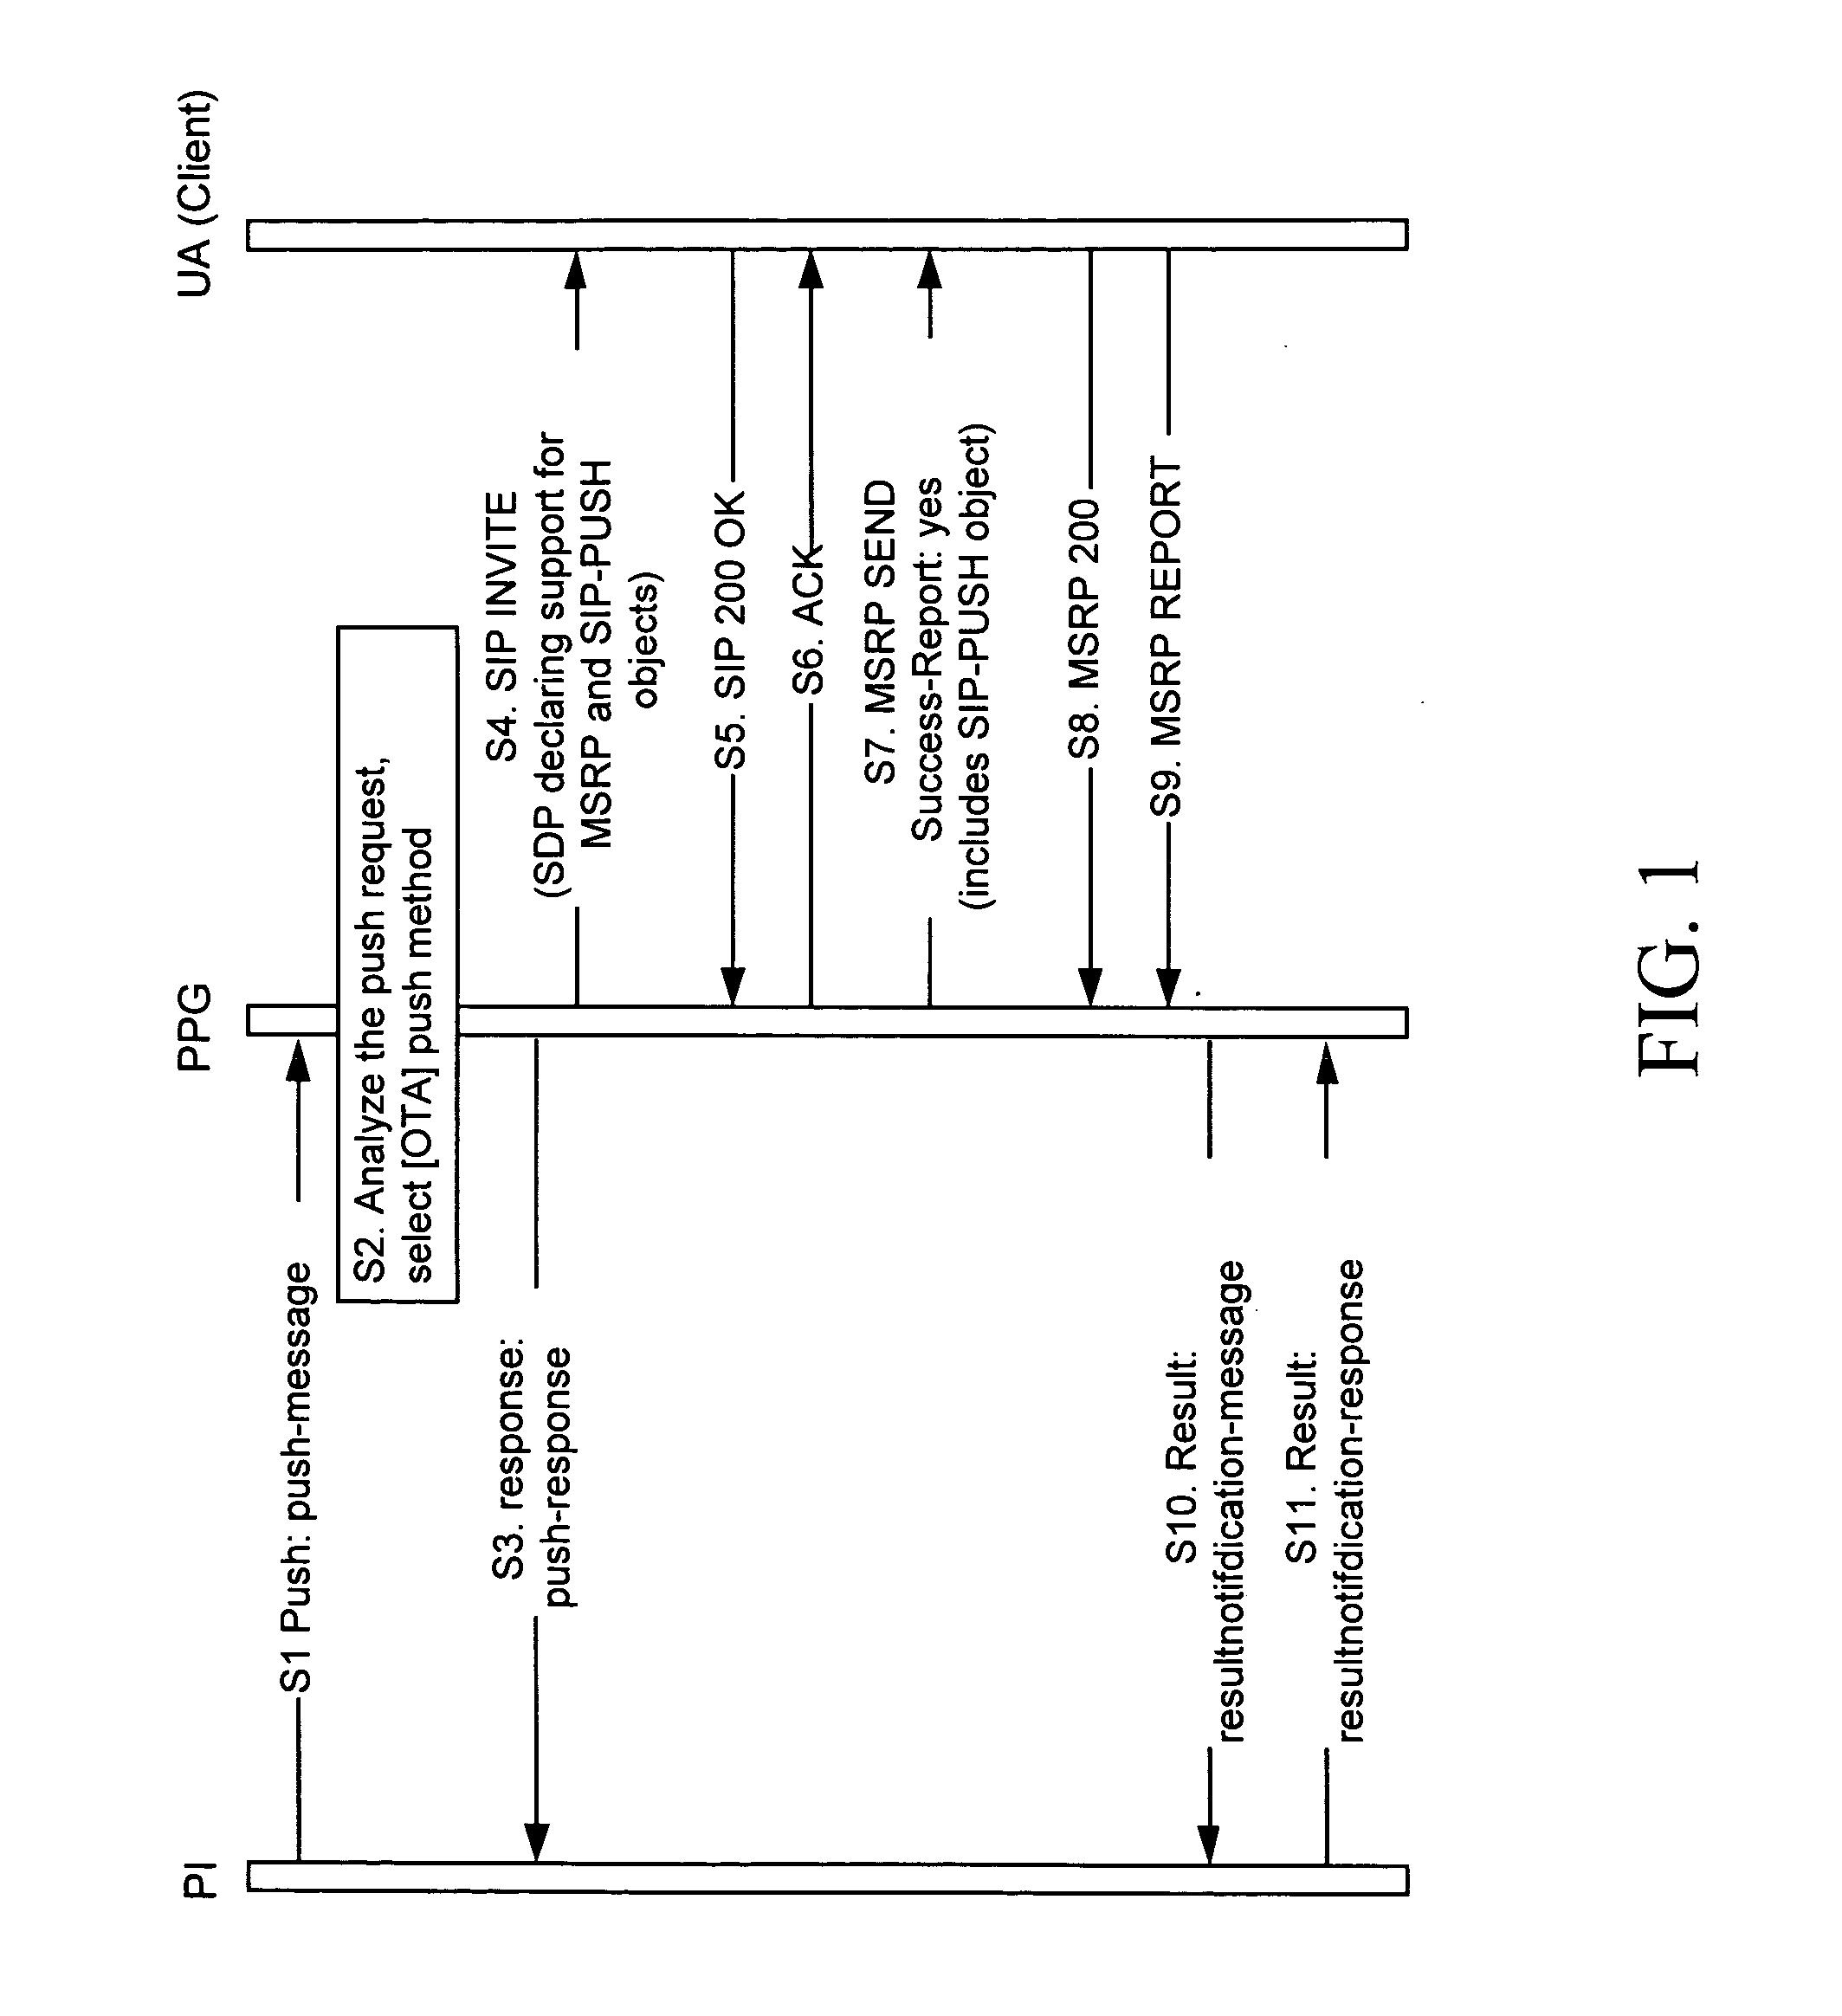 Method and entities for performing a push session in a communication system